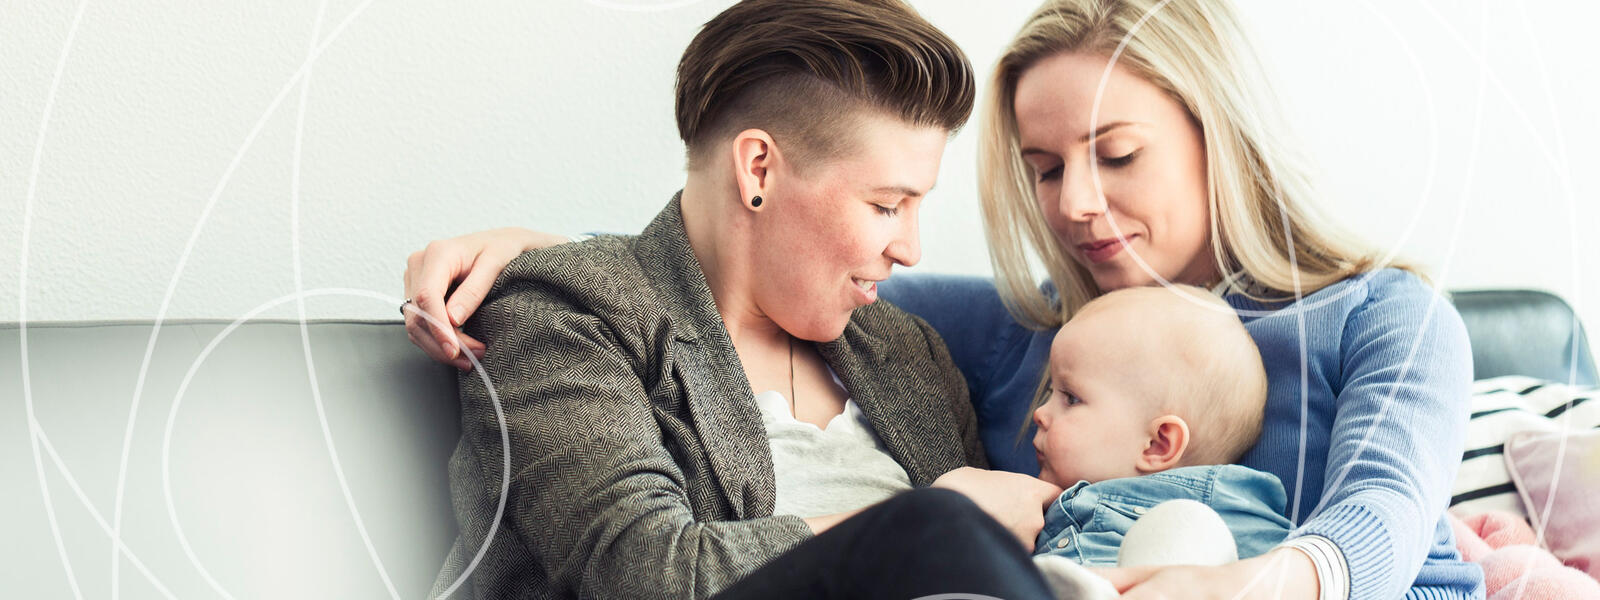 LGBTQ Family with Baby Behavioral Health Therapy